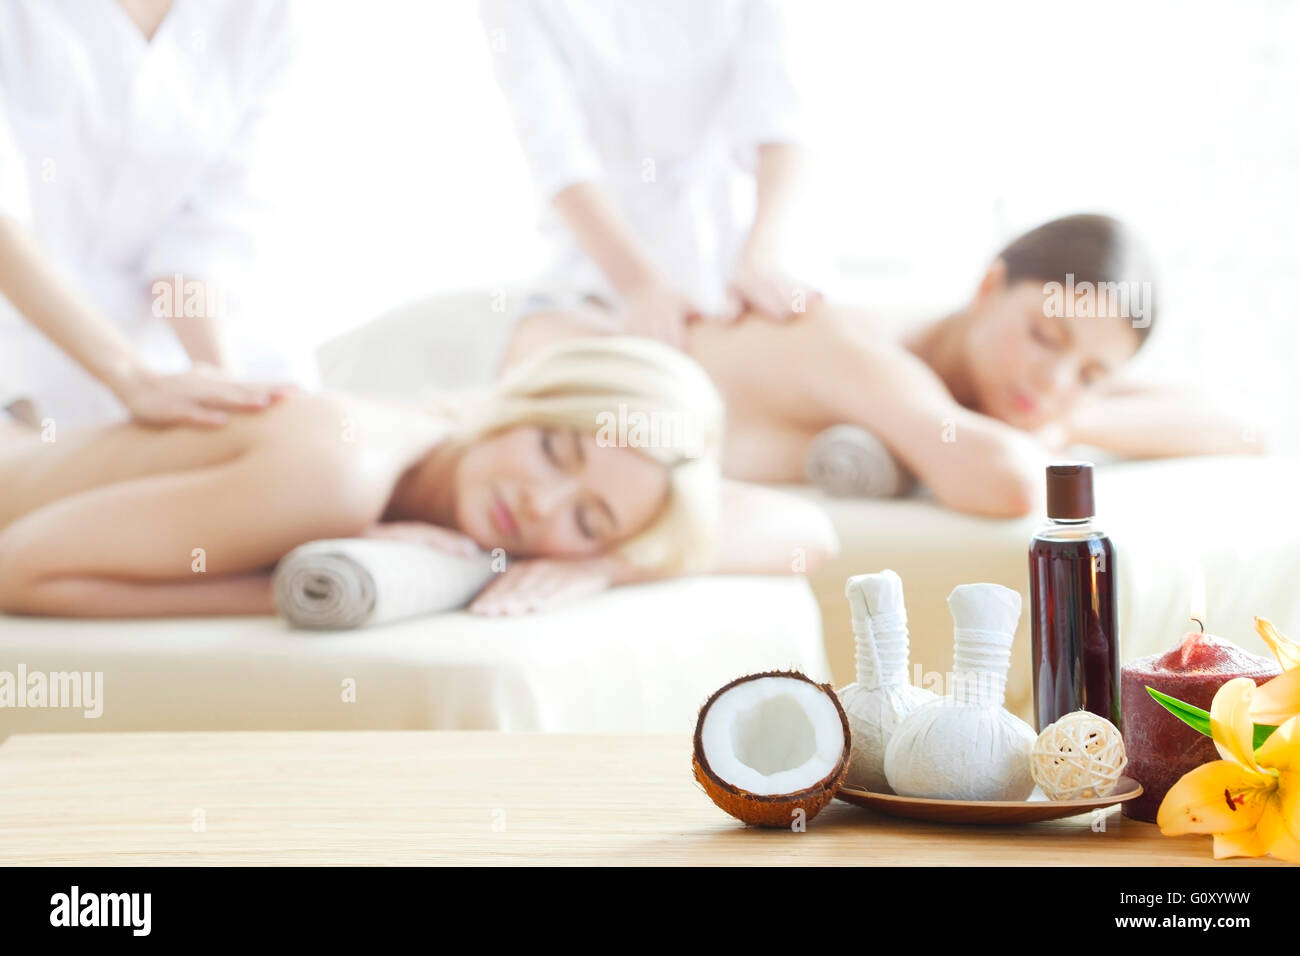 Spa Massage Tools And Women Getting Massage On Background Stock